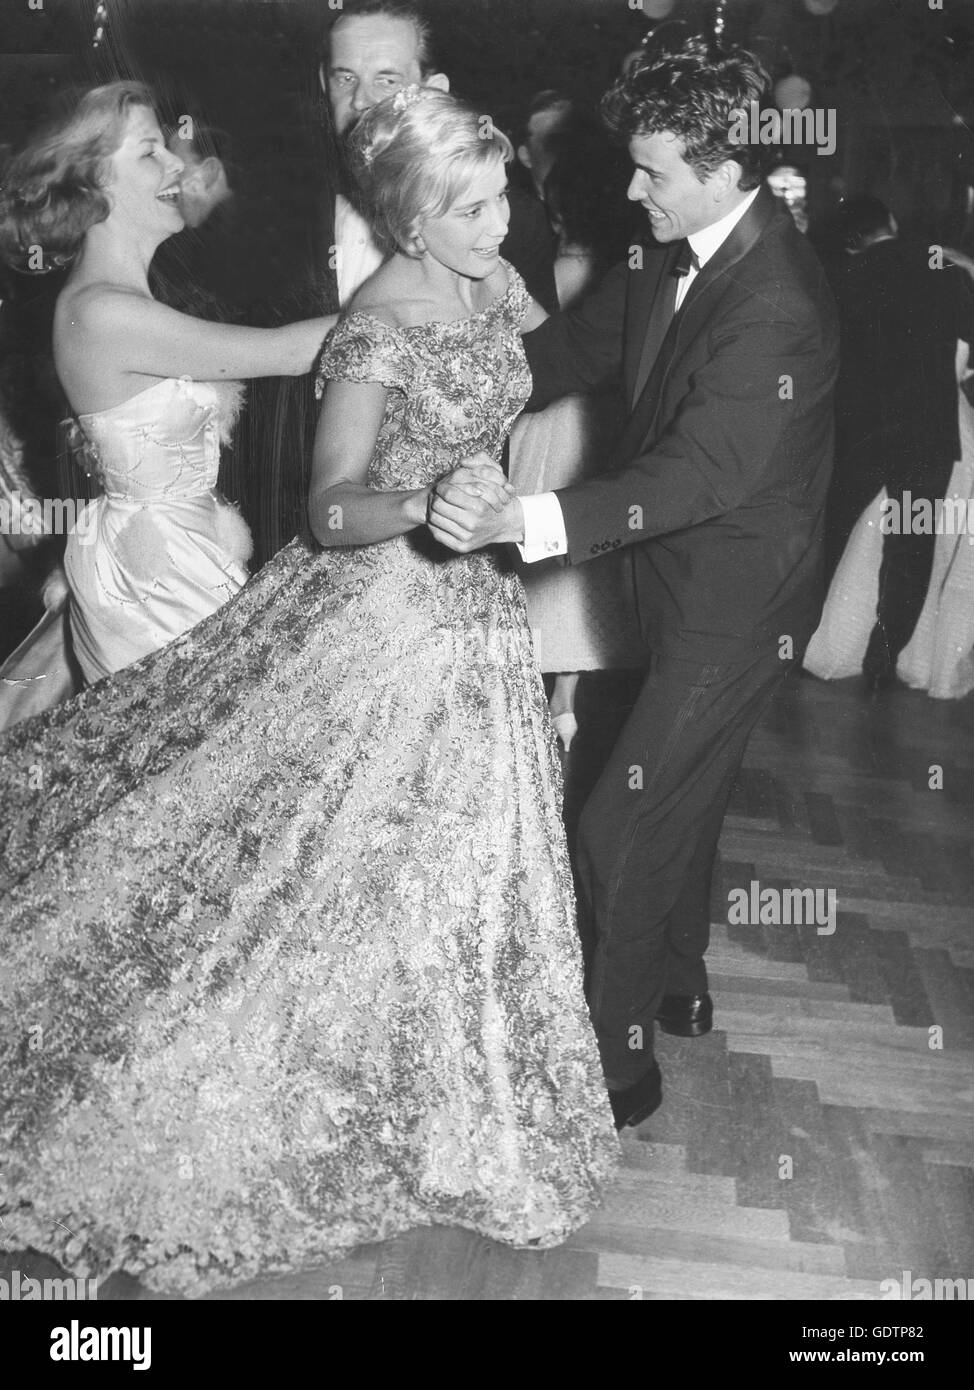 Maria Schell dancing with Horst Buchholz, 1958 Stock Photo